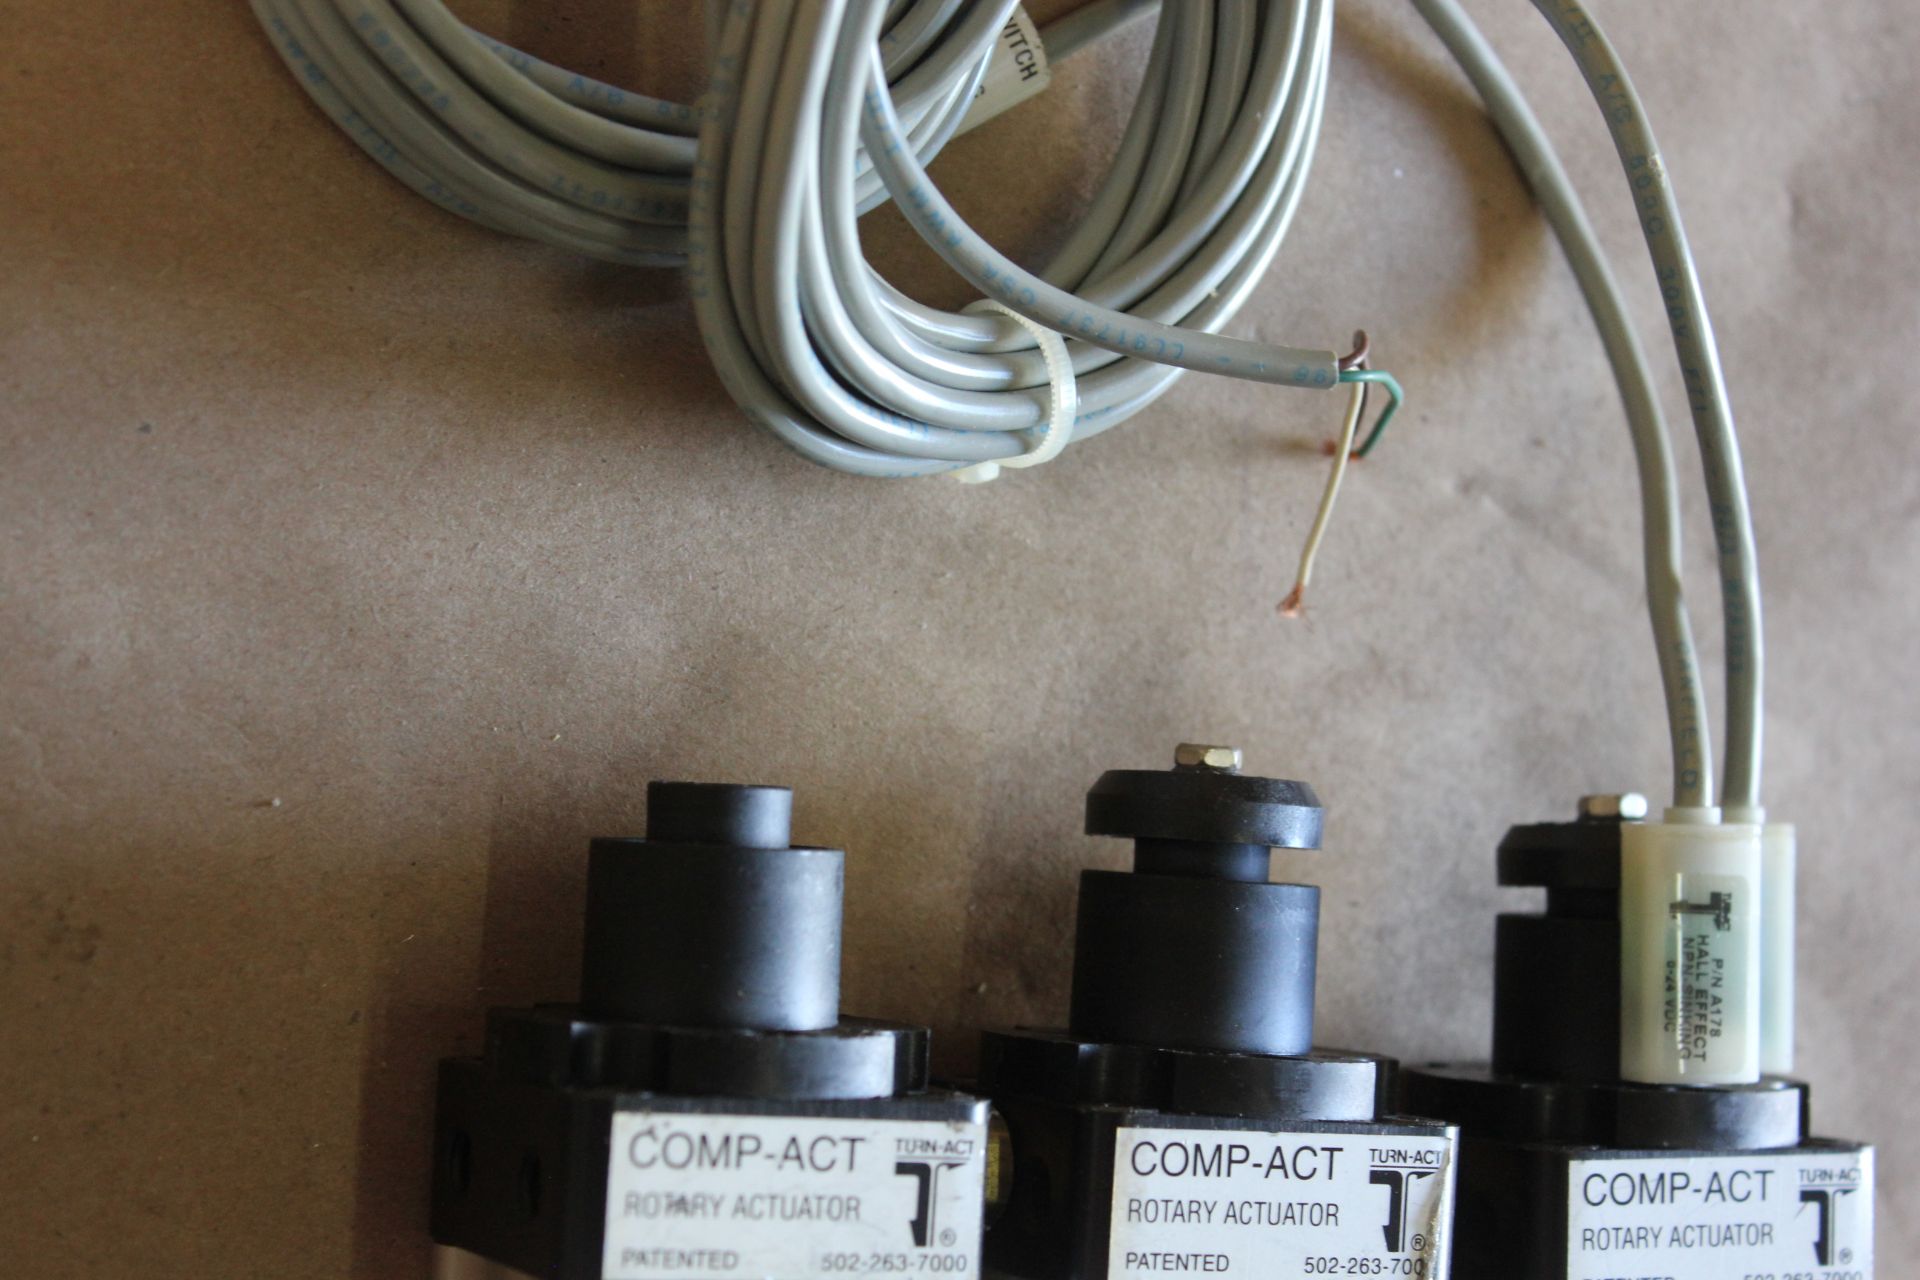 LOT OF COMP-ACT ROTARY ACTUATORS - Image 3 of 4